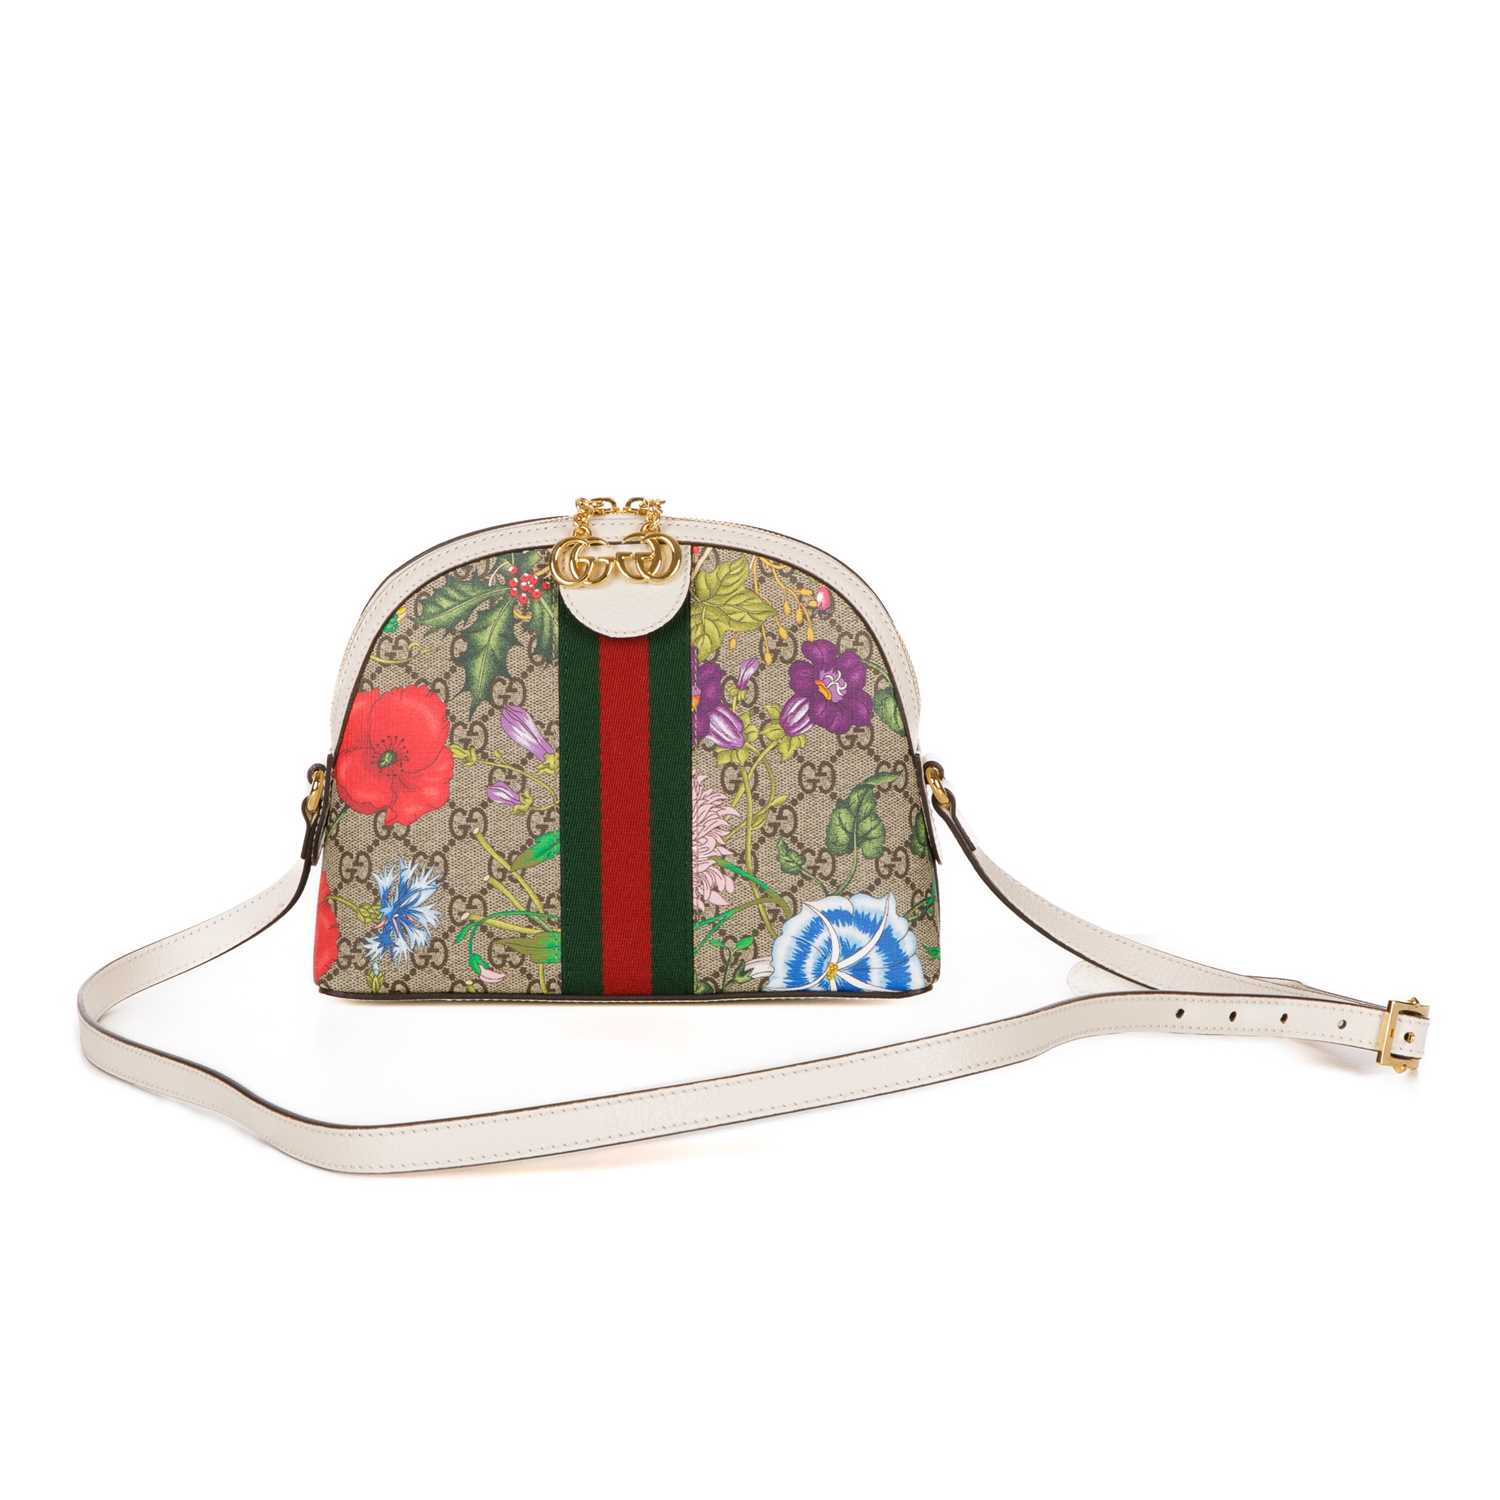 Gucci, a Supreme Floral Web Ophidia handbag, crafted from beige GG coated canvas, overlayed with - Bild 2 aus 4